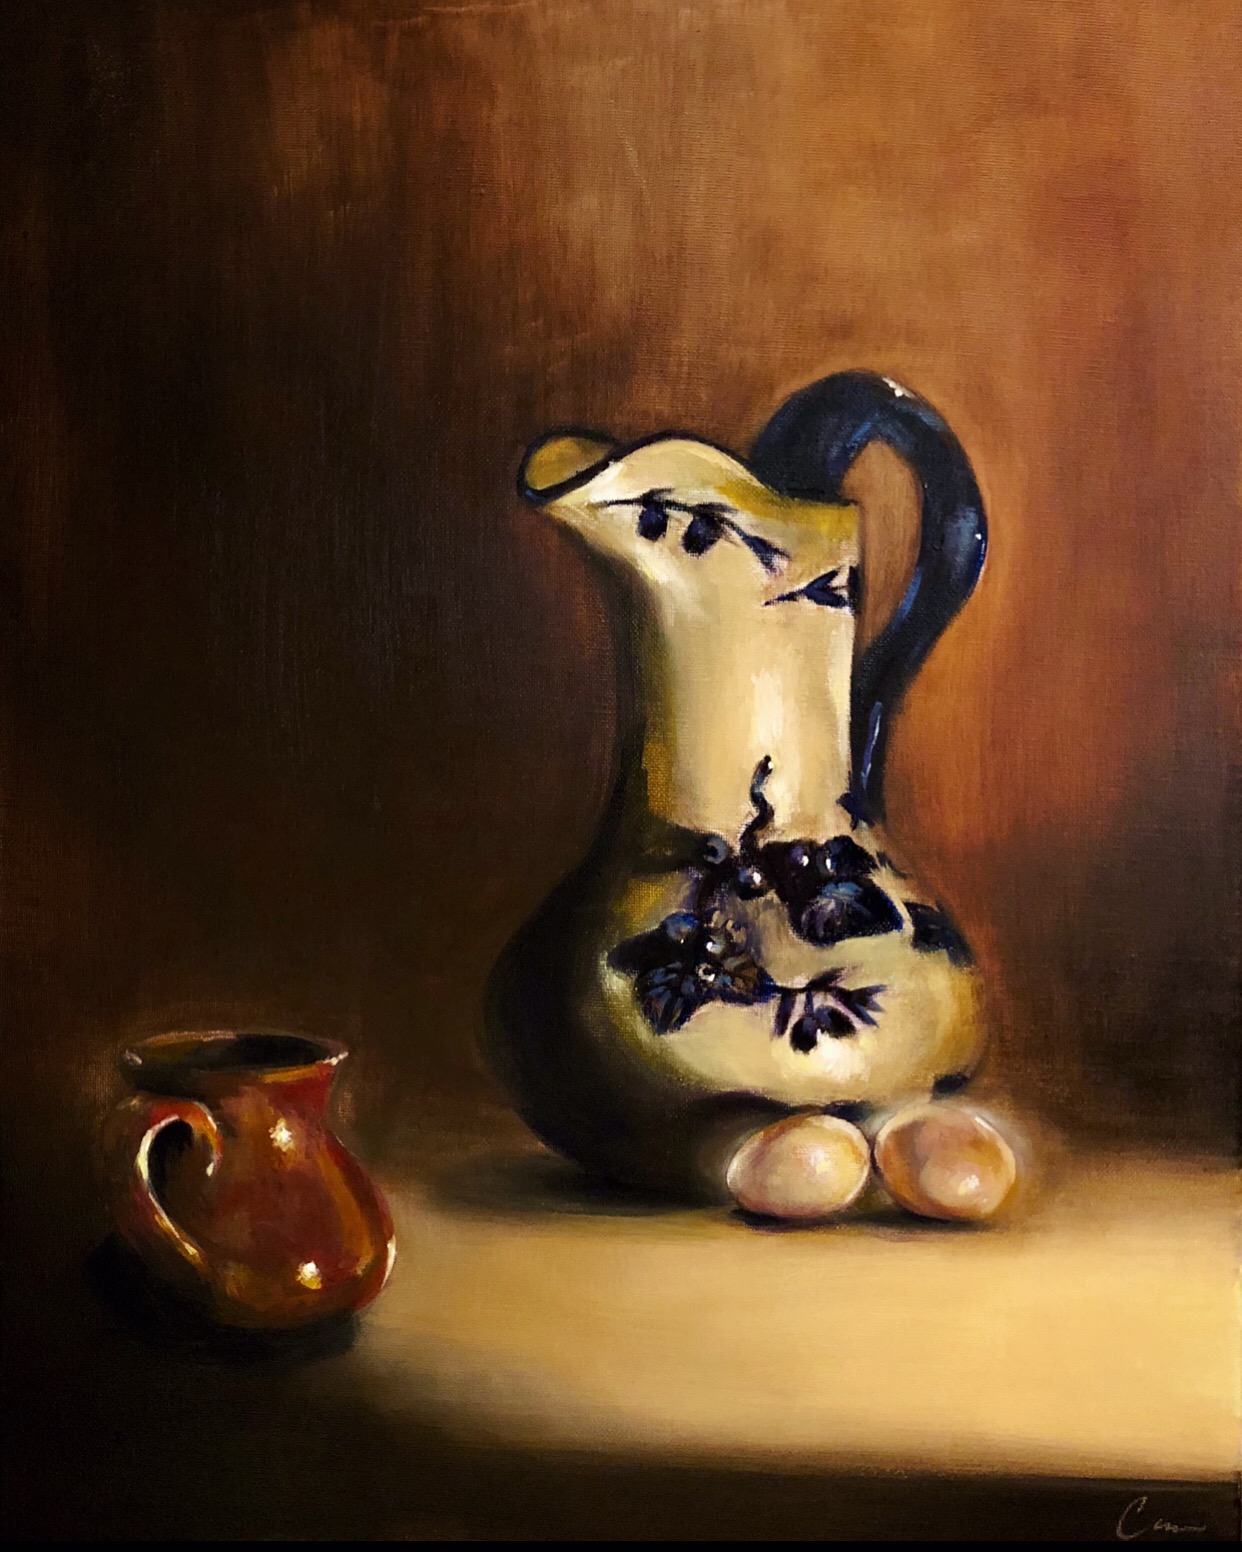   “The Pitcher”   SOLD  Oil on Canvas  16” X 20” 